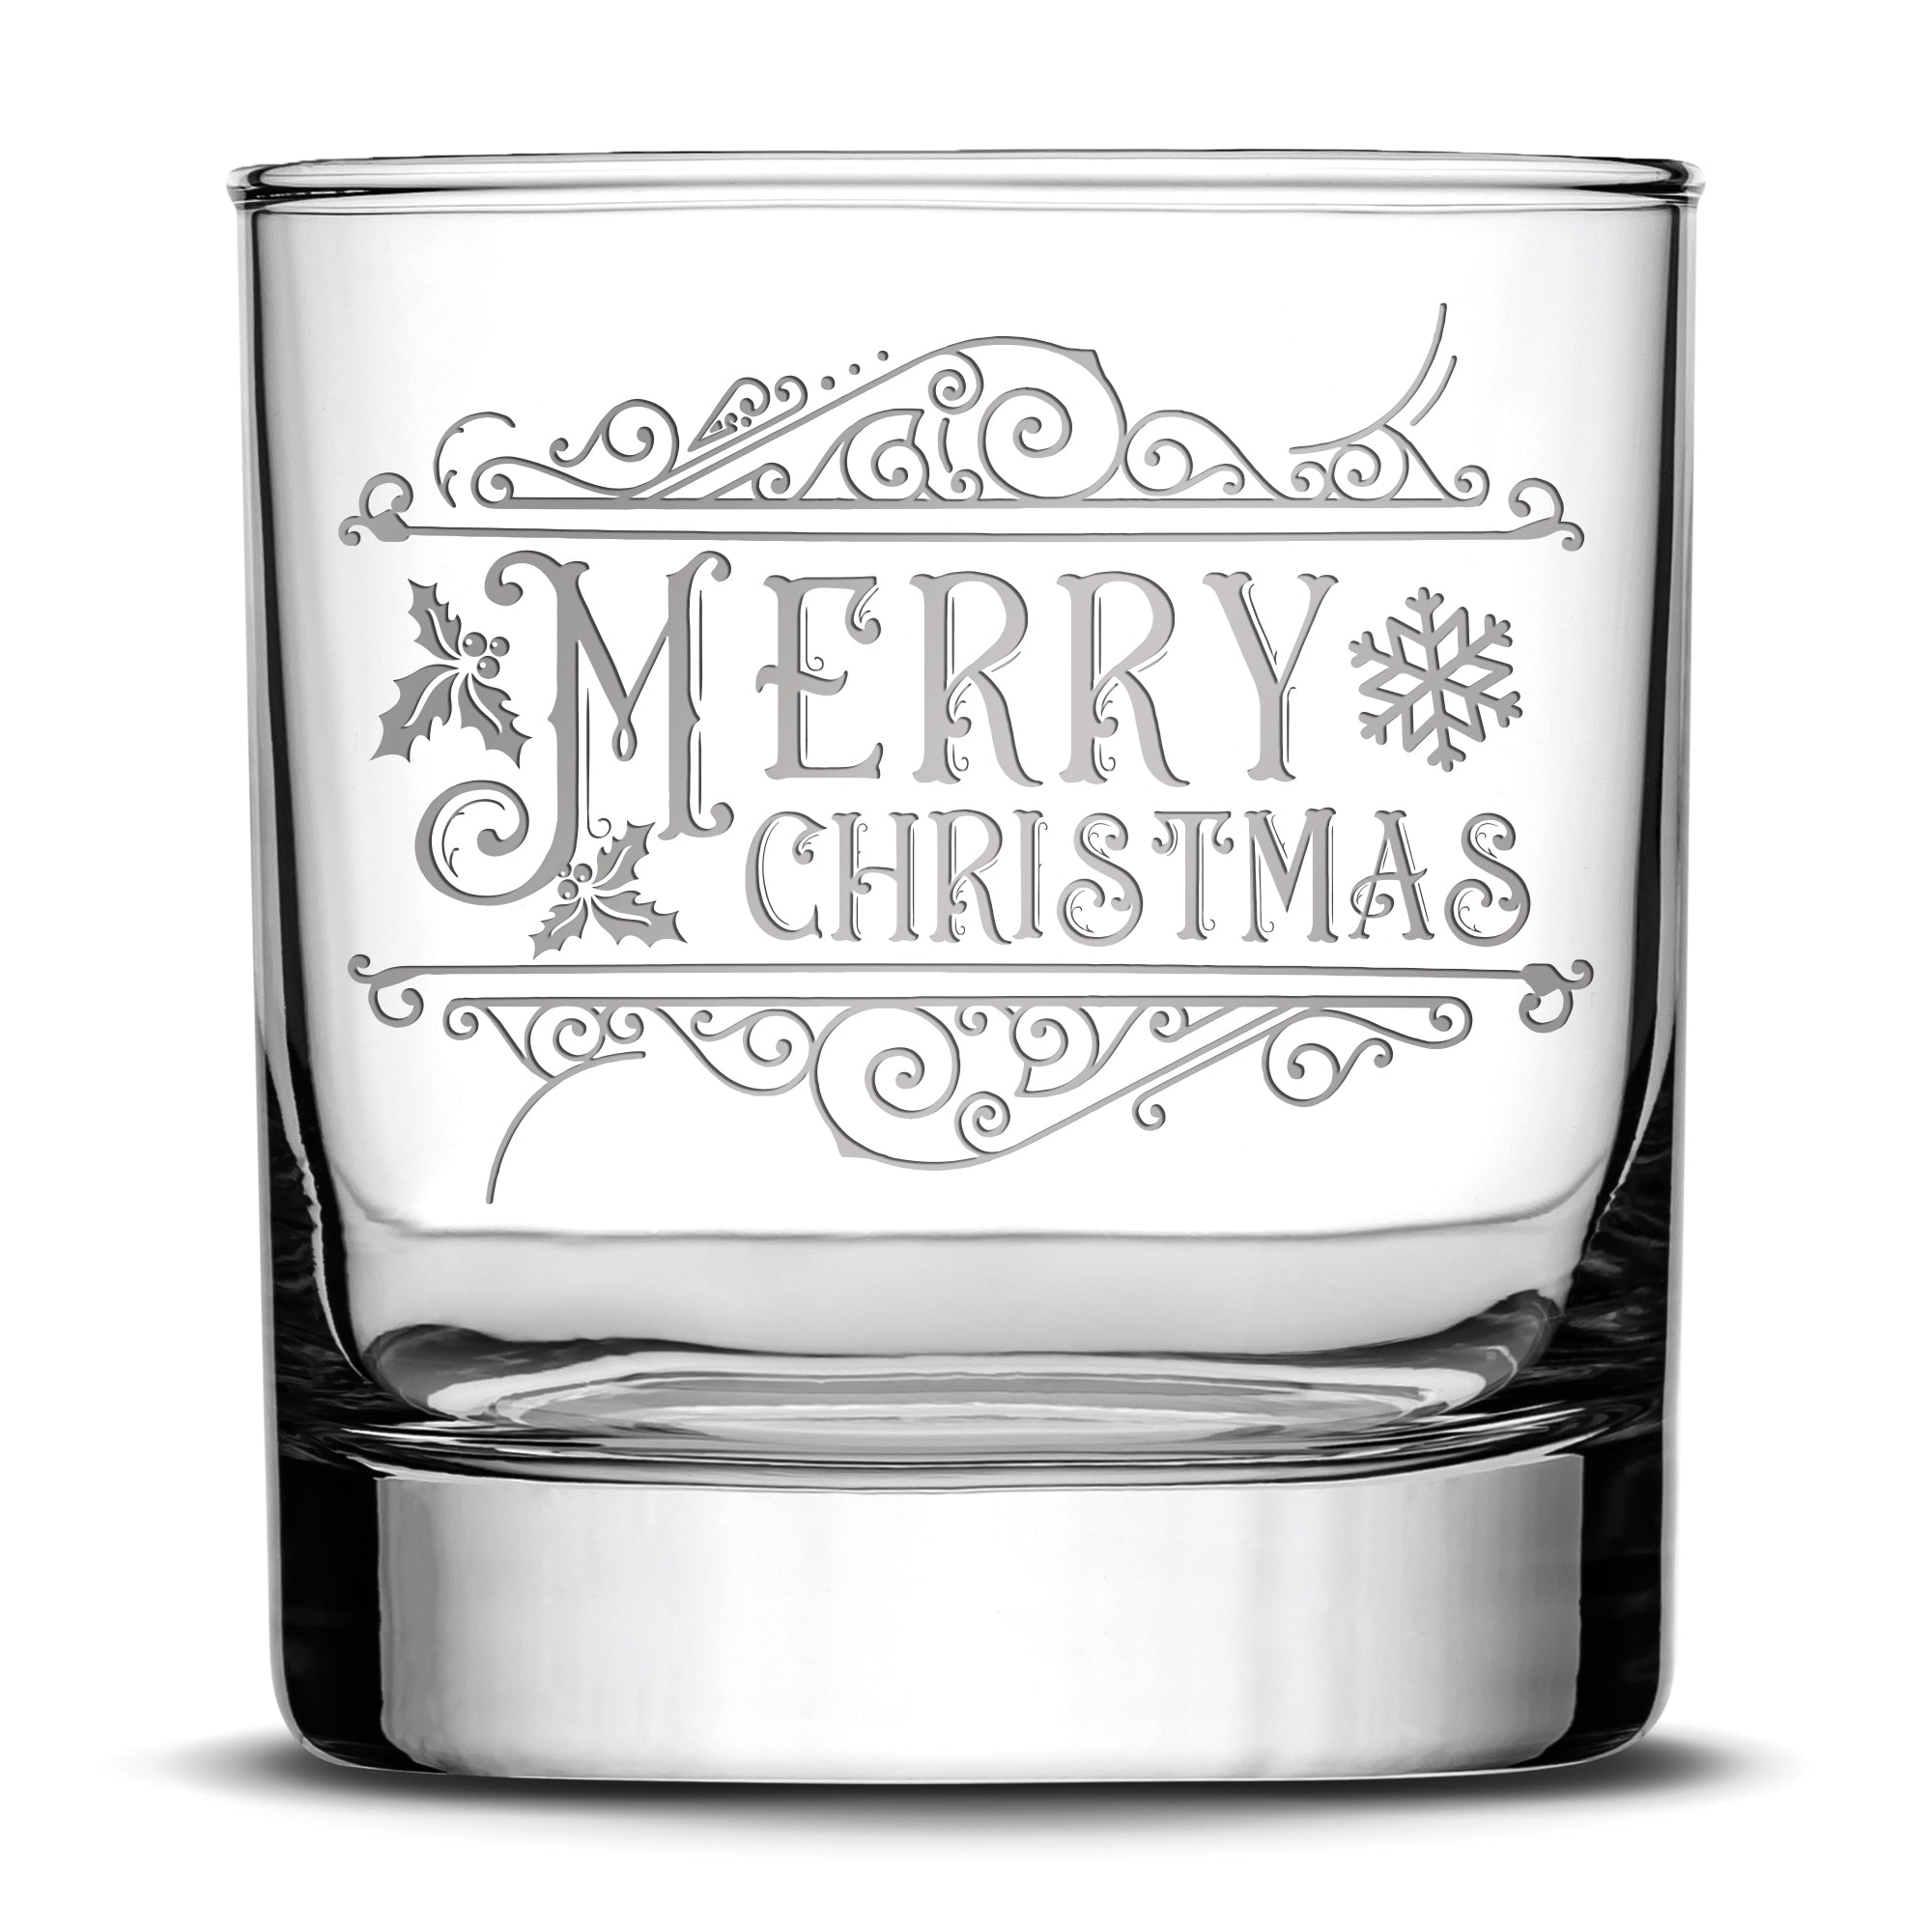 Premium Merry Christmas Whiskey Glass, Laser Etched or Hand Etched 11oz Rocks Glass, Made in USA